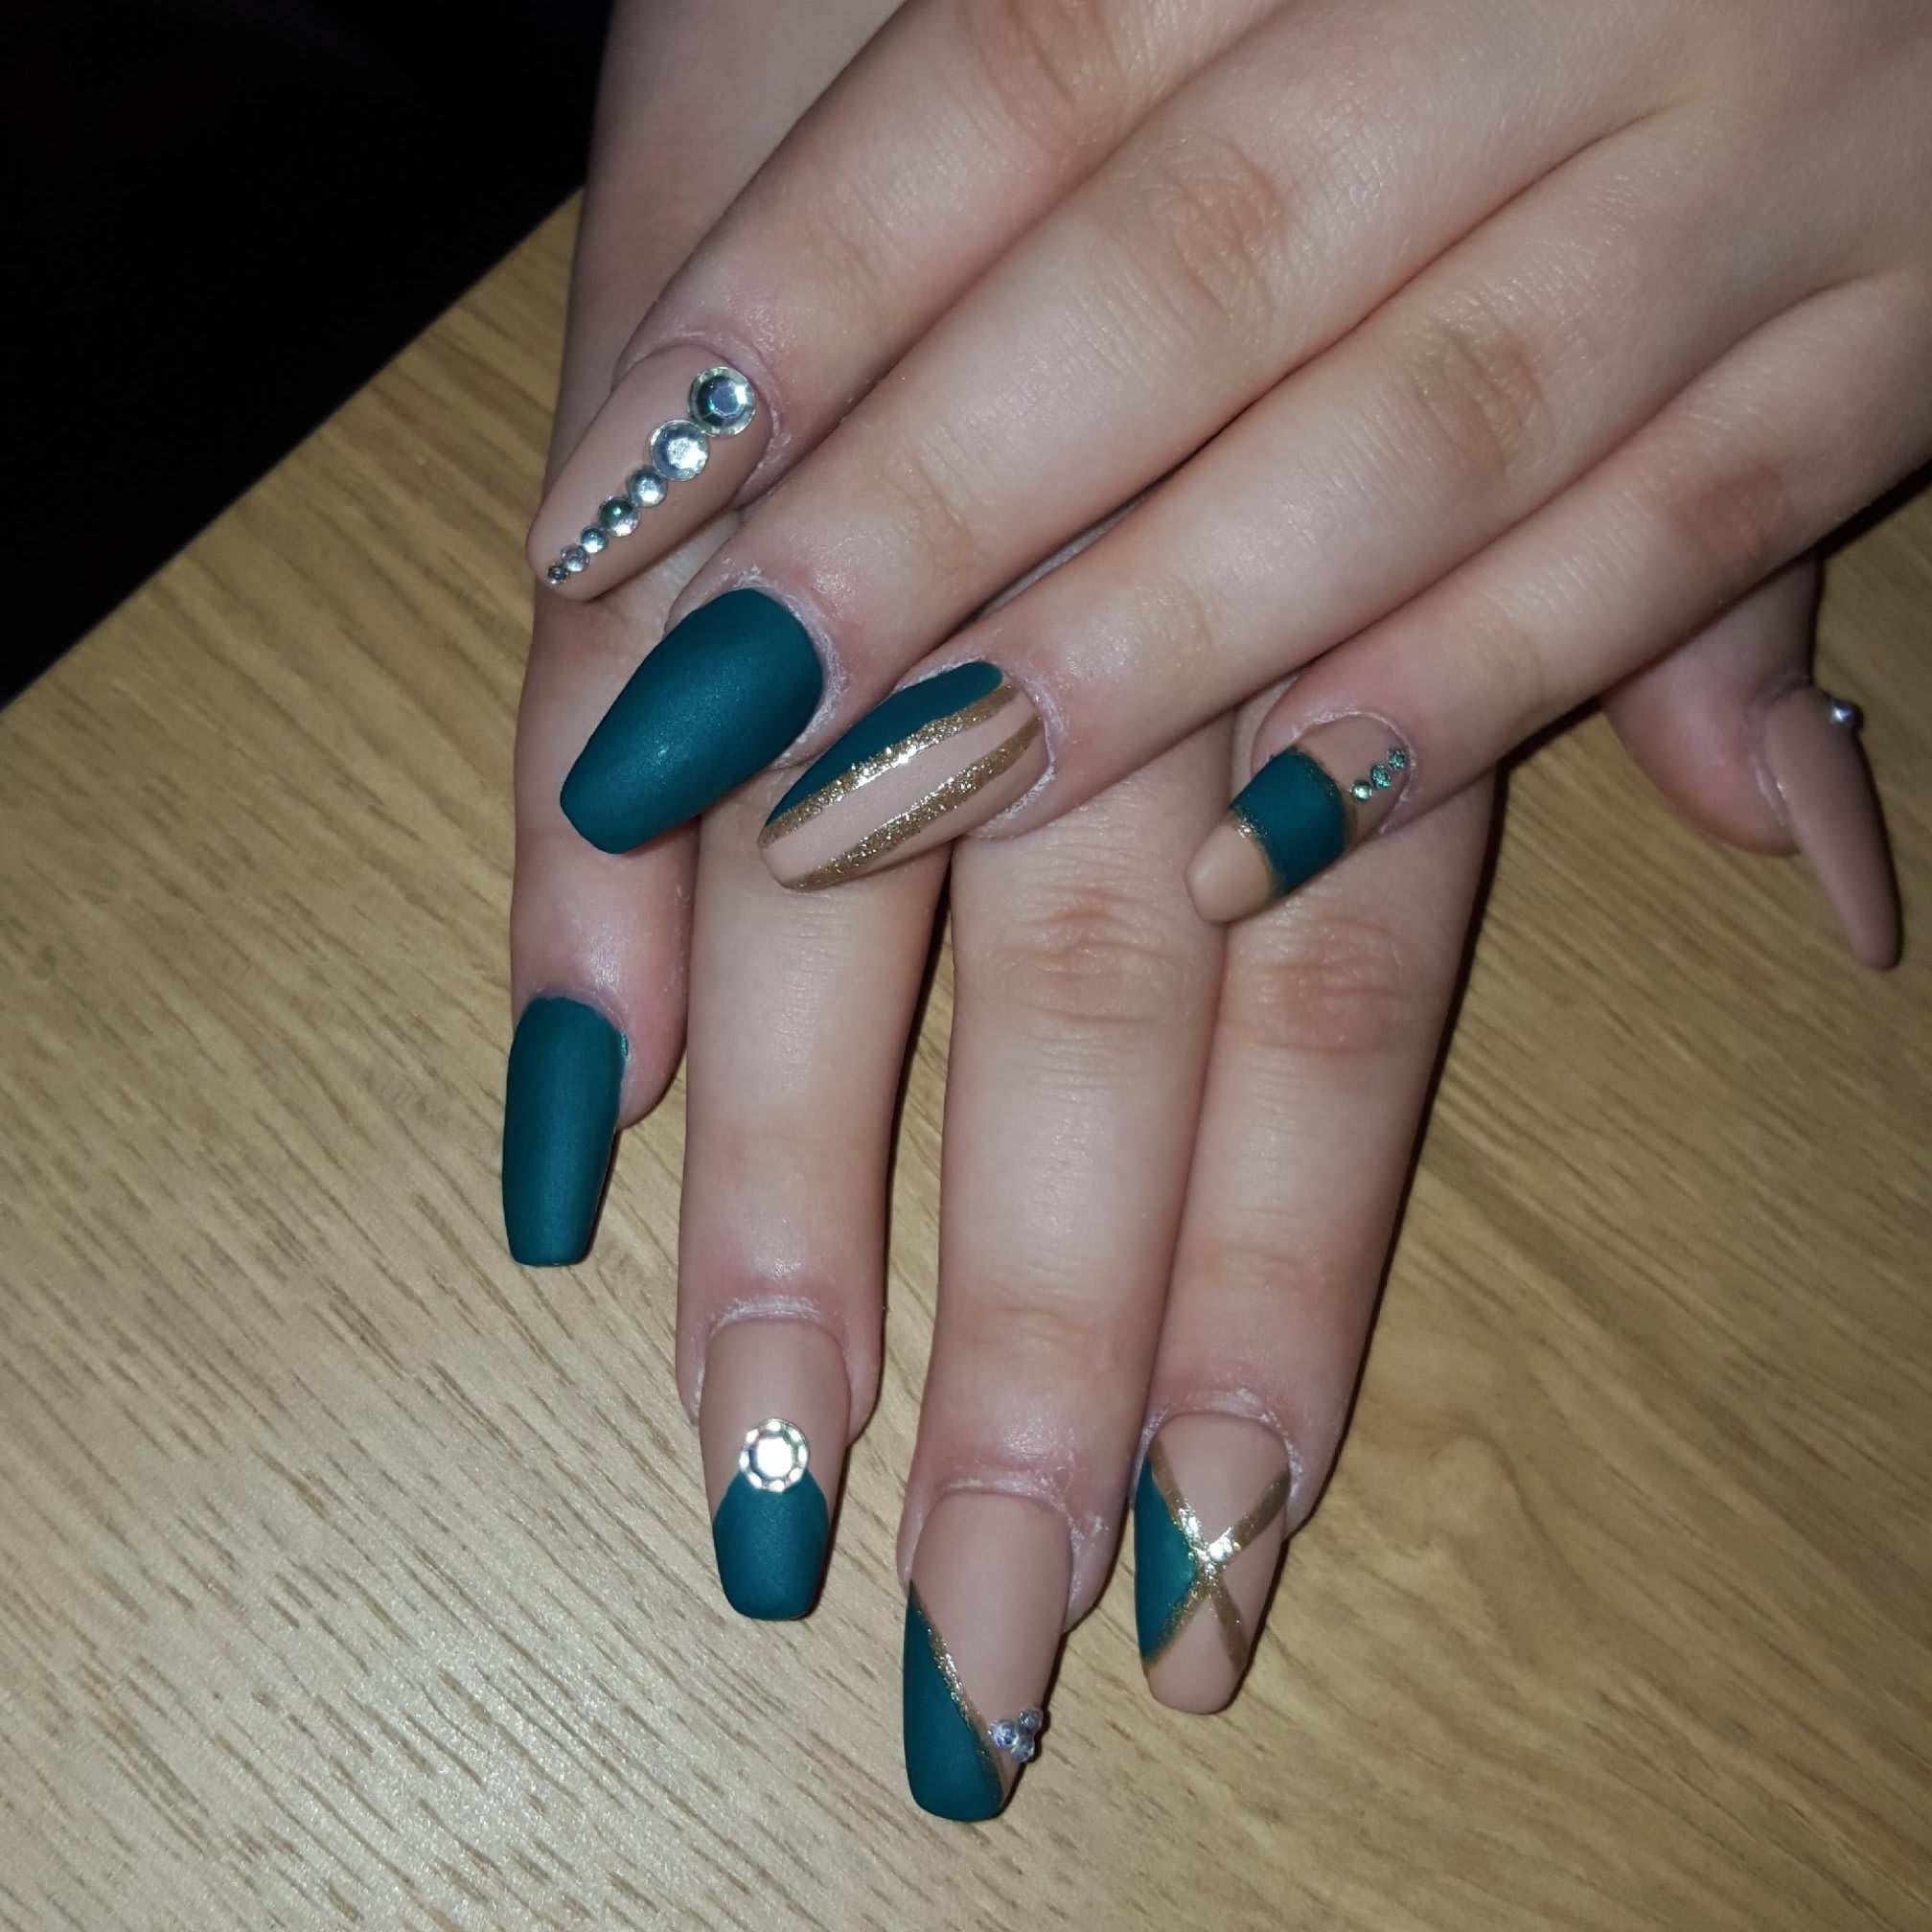 Images Ealing's Nails & Beauty